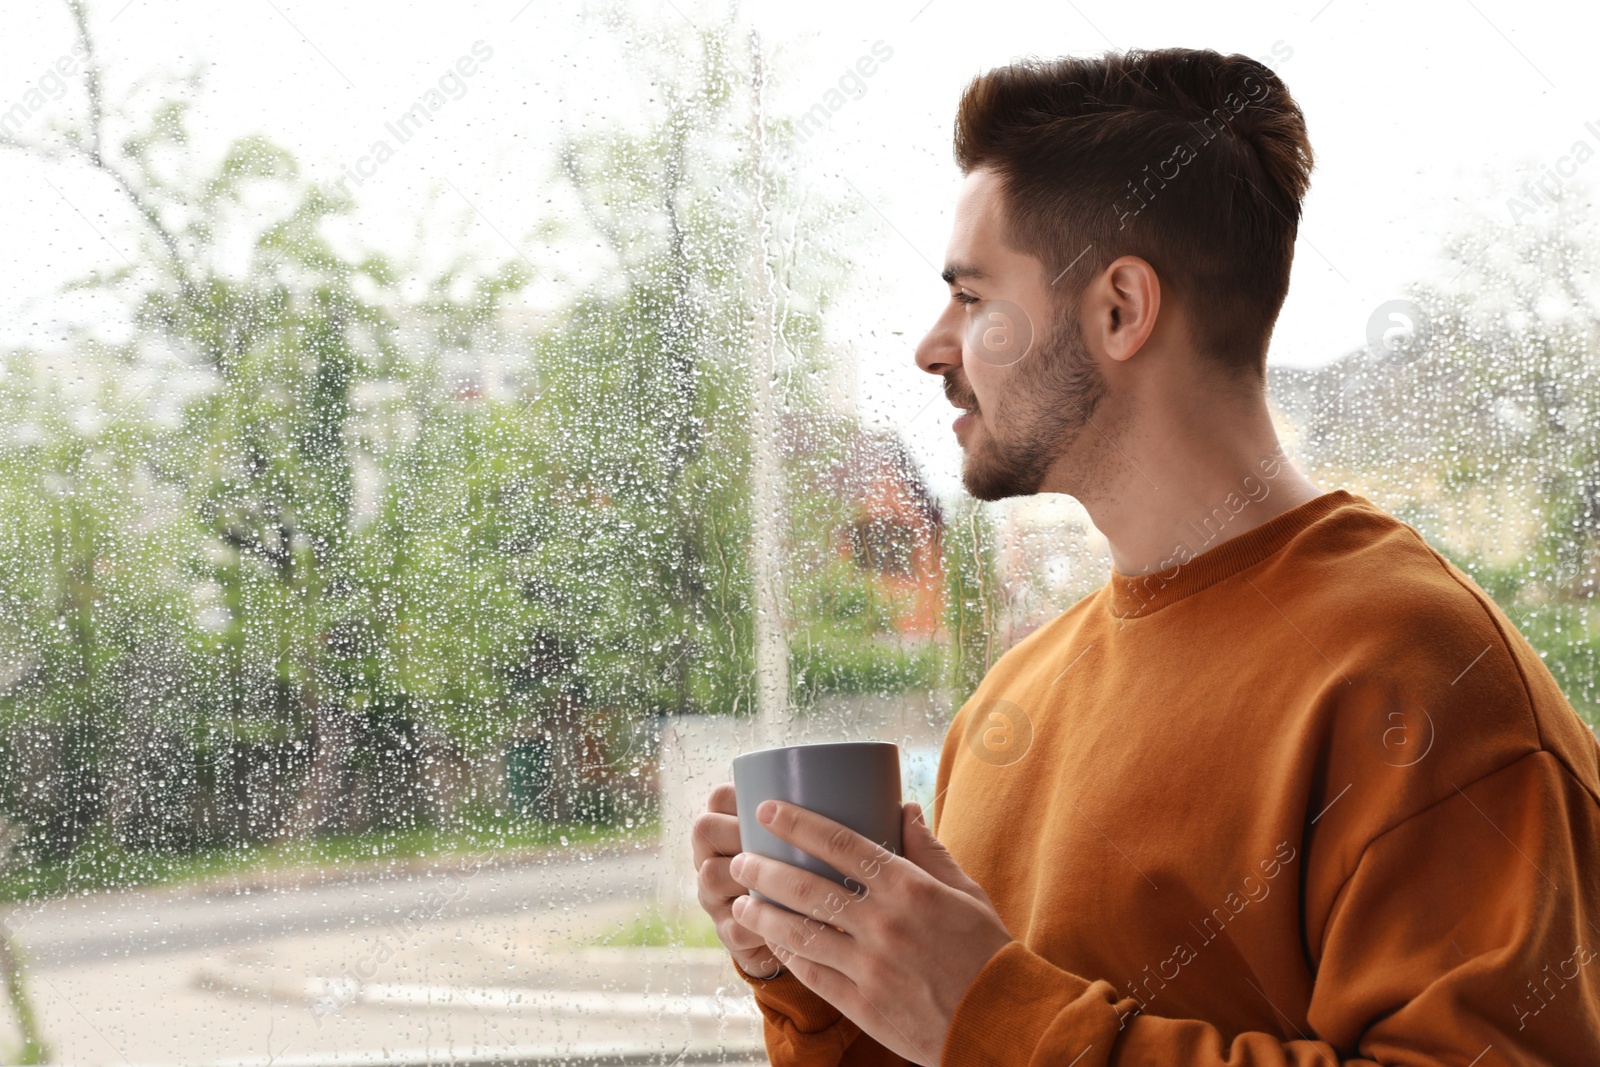 Photo of Happy handsome man with cup of coffee near window on rainy day